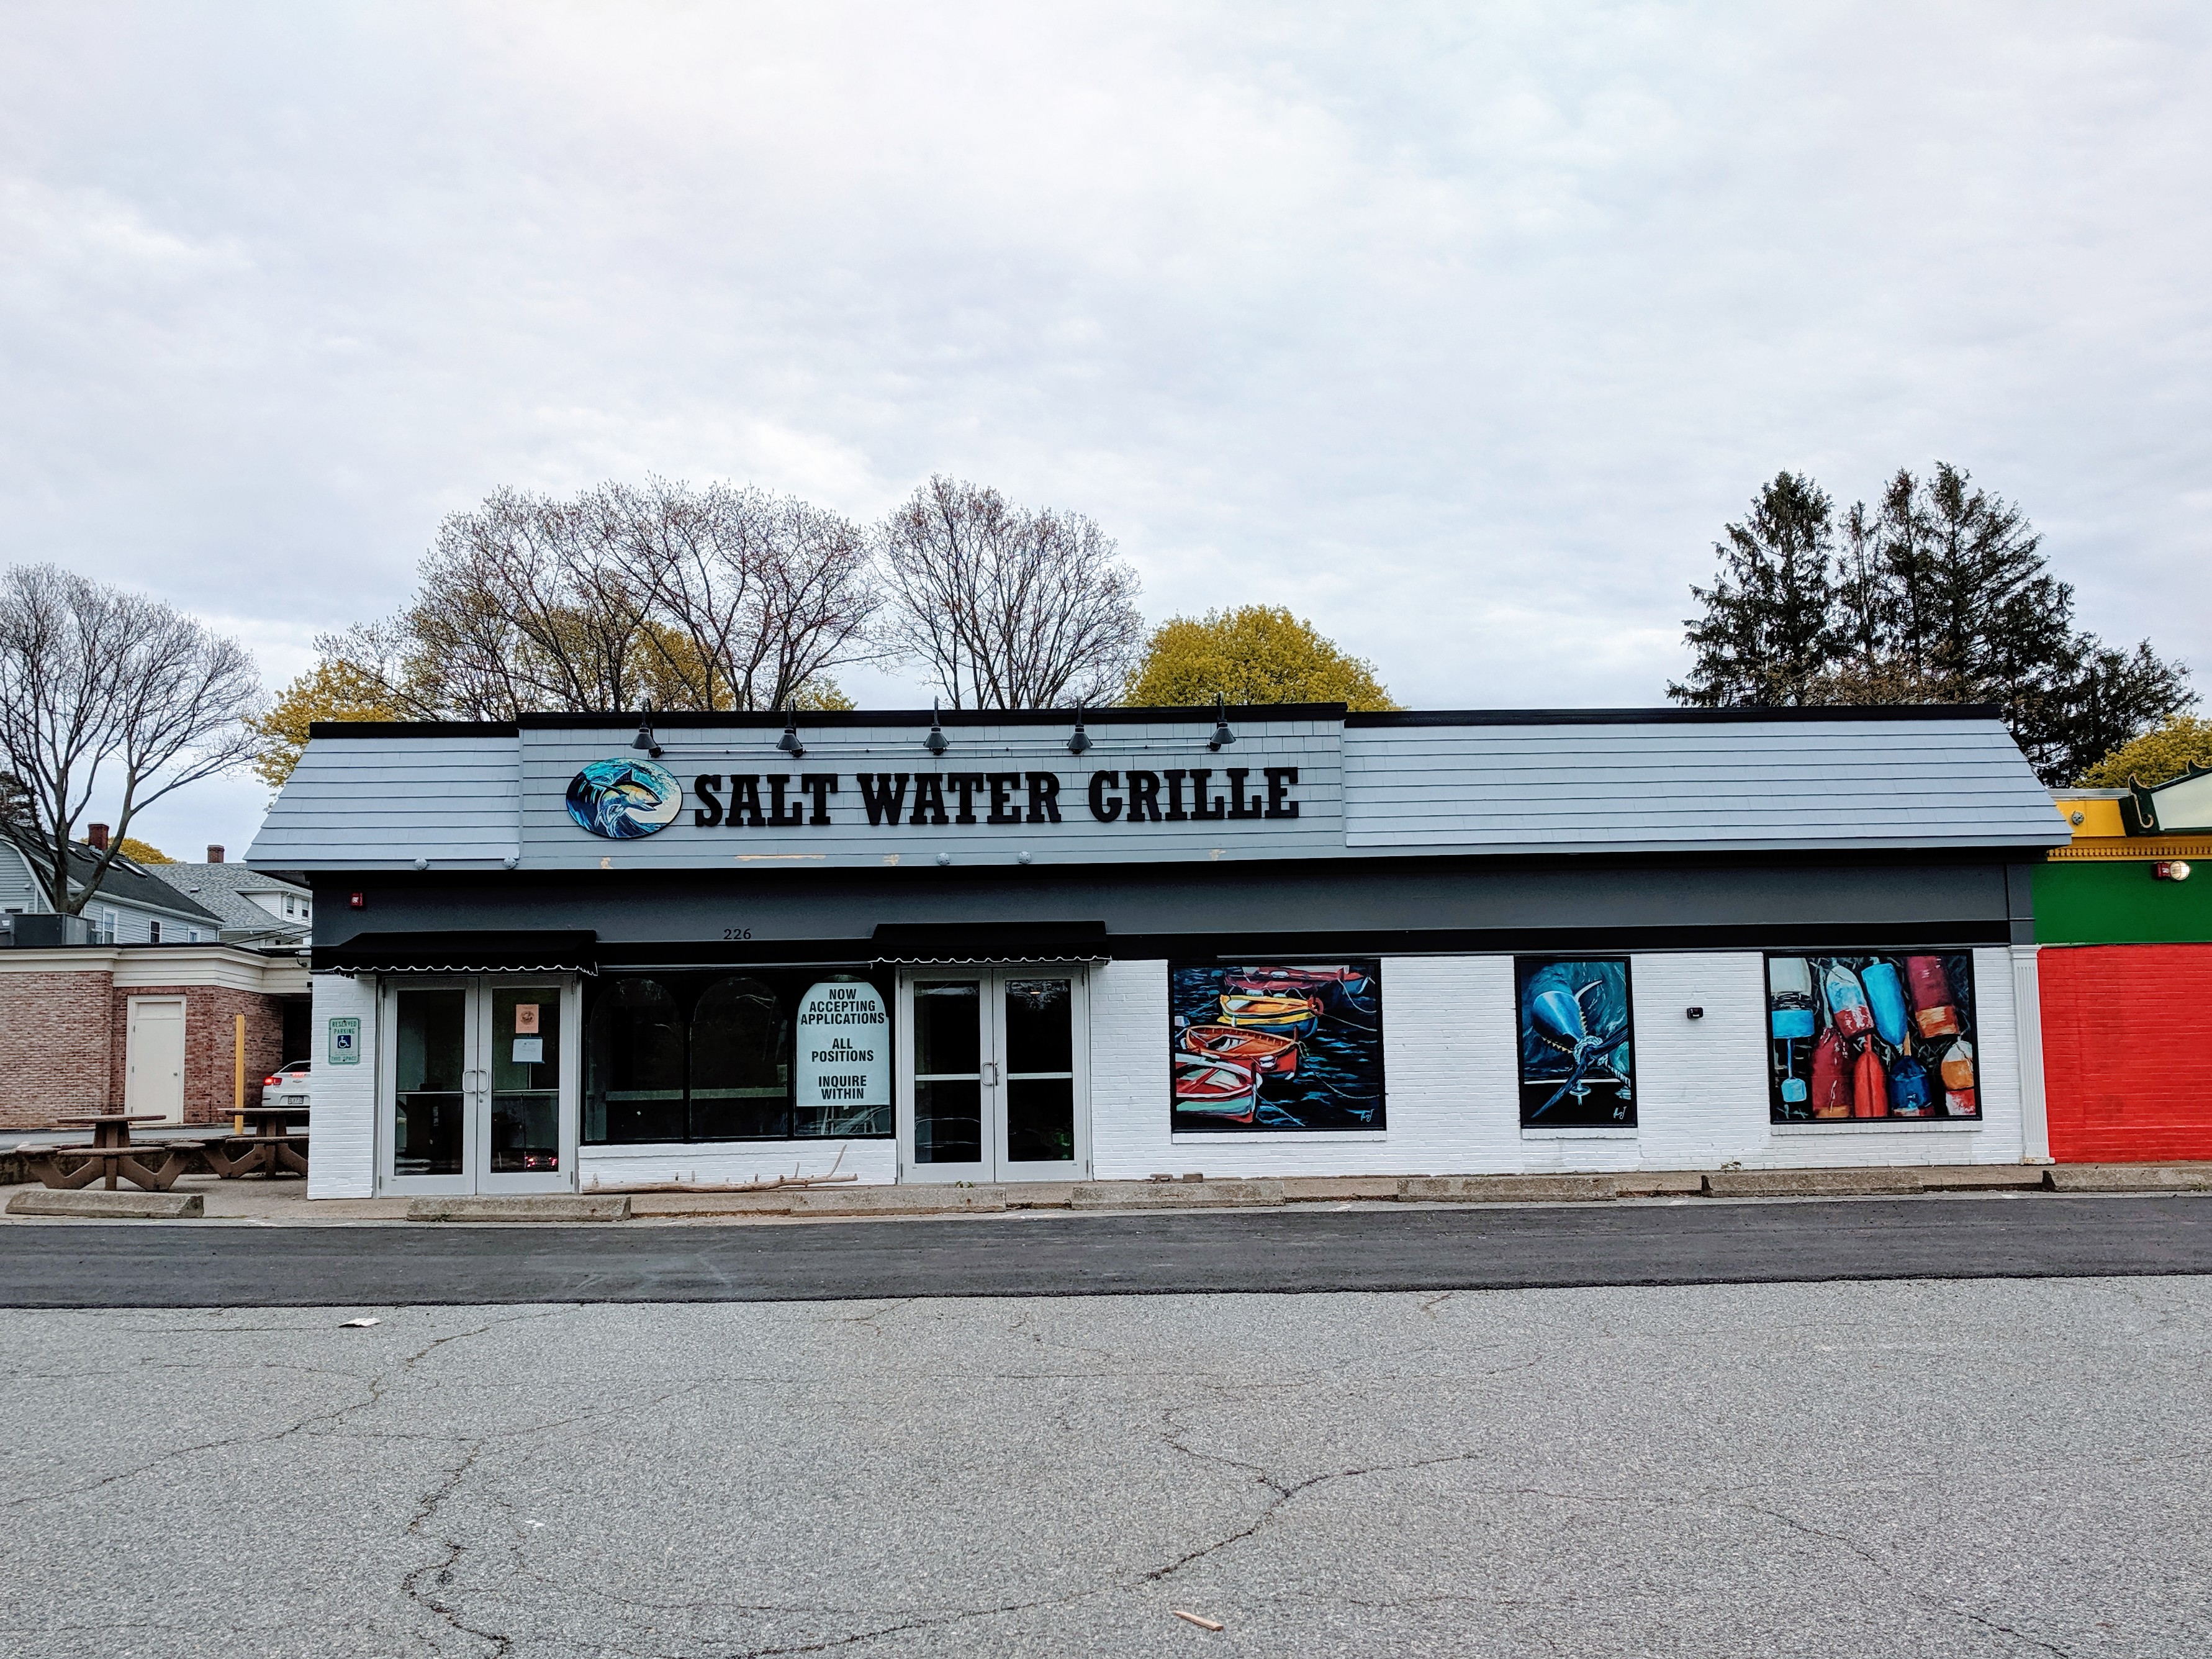 Salt Water Grille_opening May or June 2019_ Gloucester MA_ art and logo by Alexia J Seaside graphics_20190510_© c ryan (4)